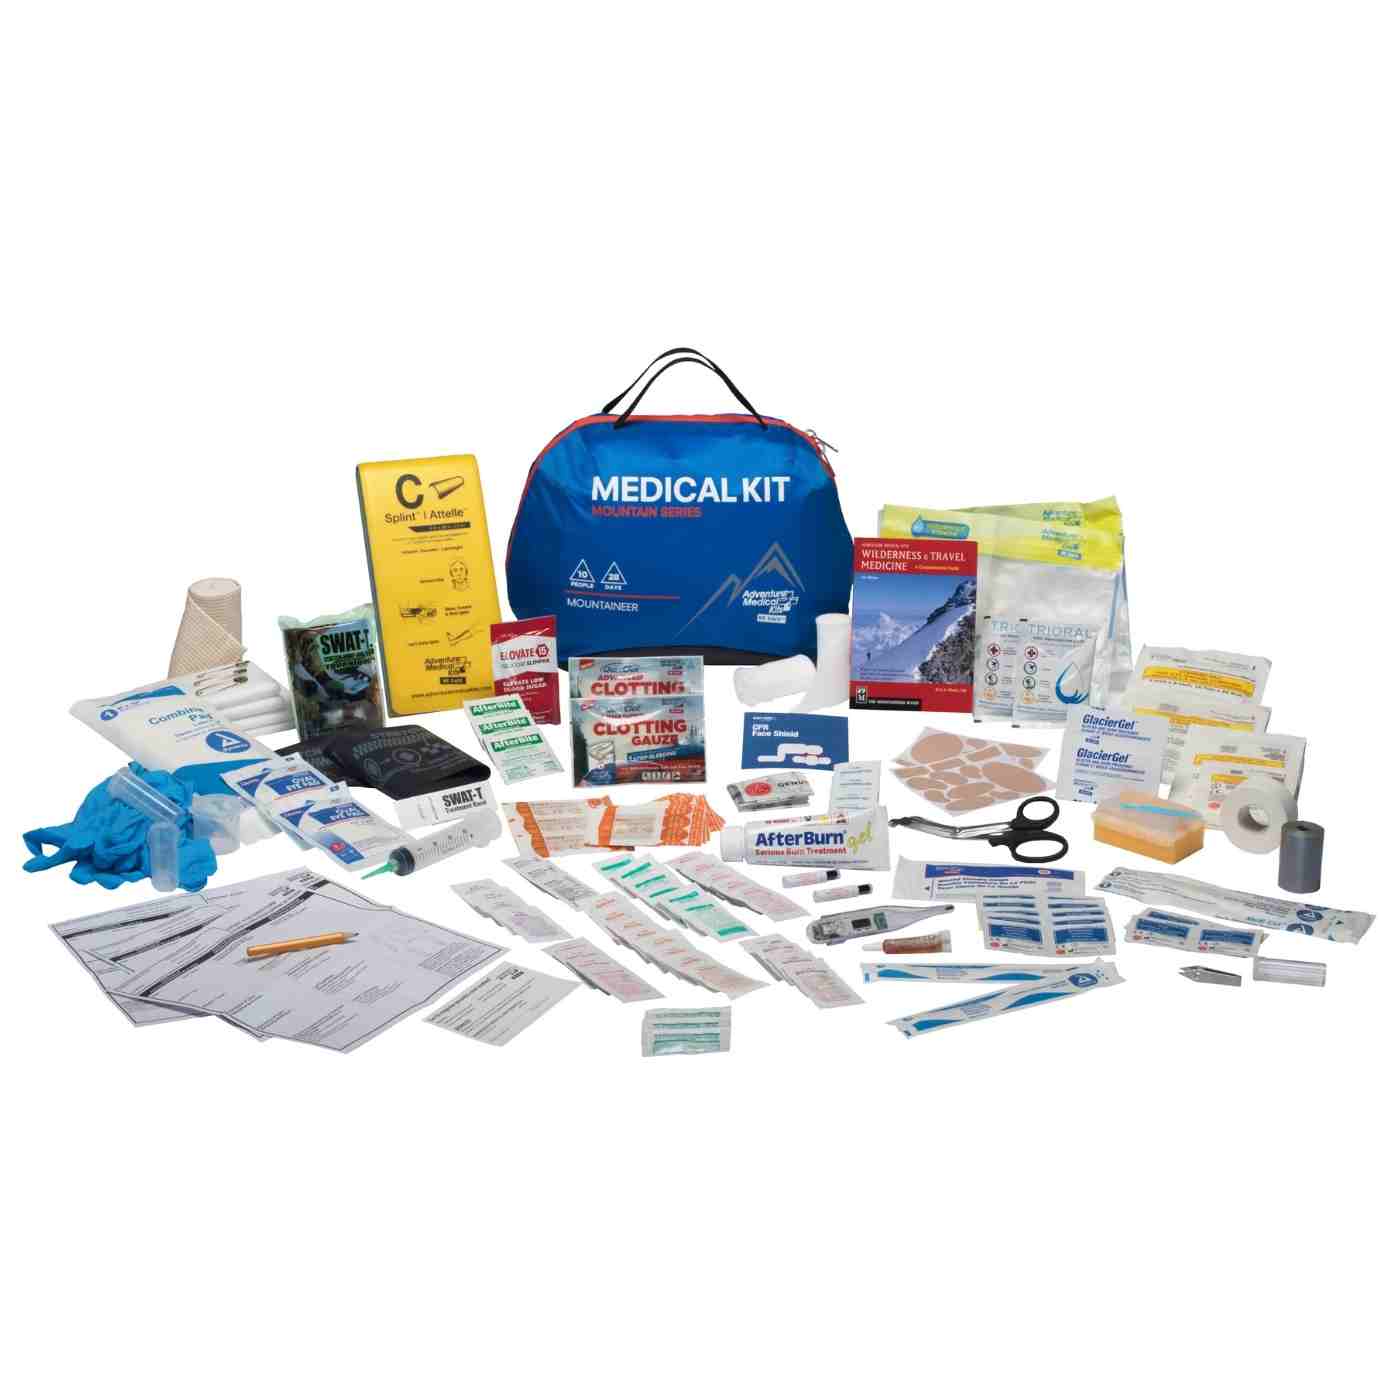 Mountain Series Medical Kit - Mountaineer contents